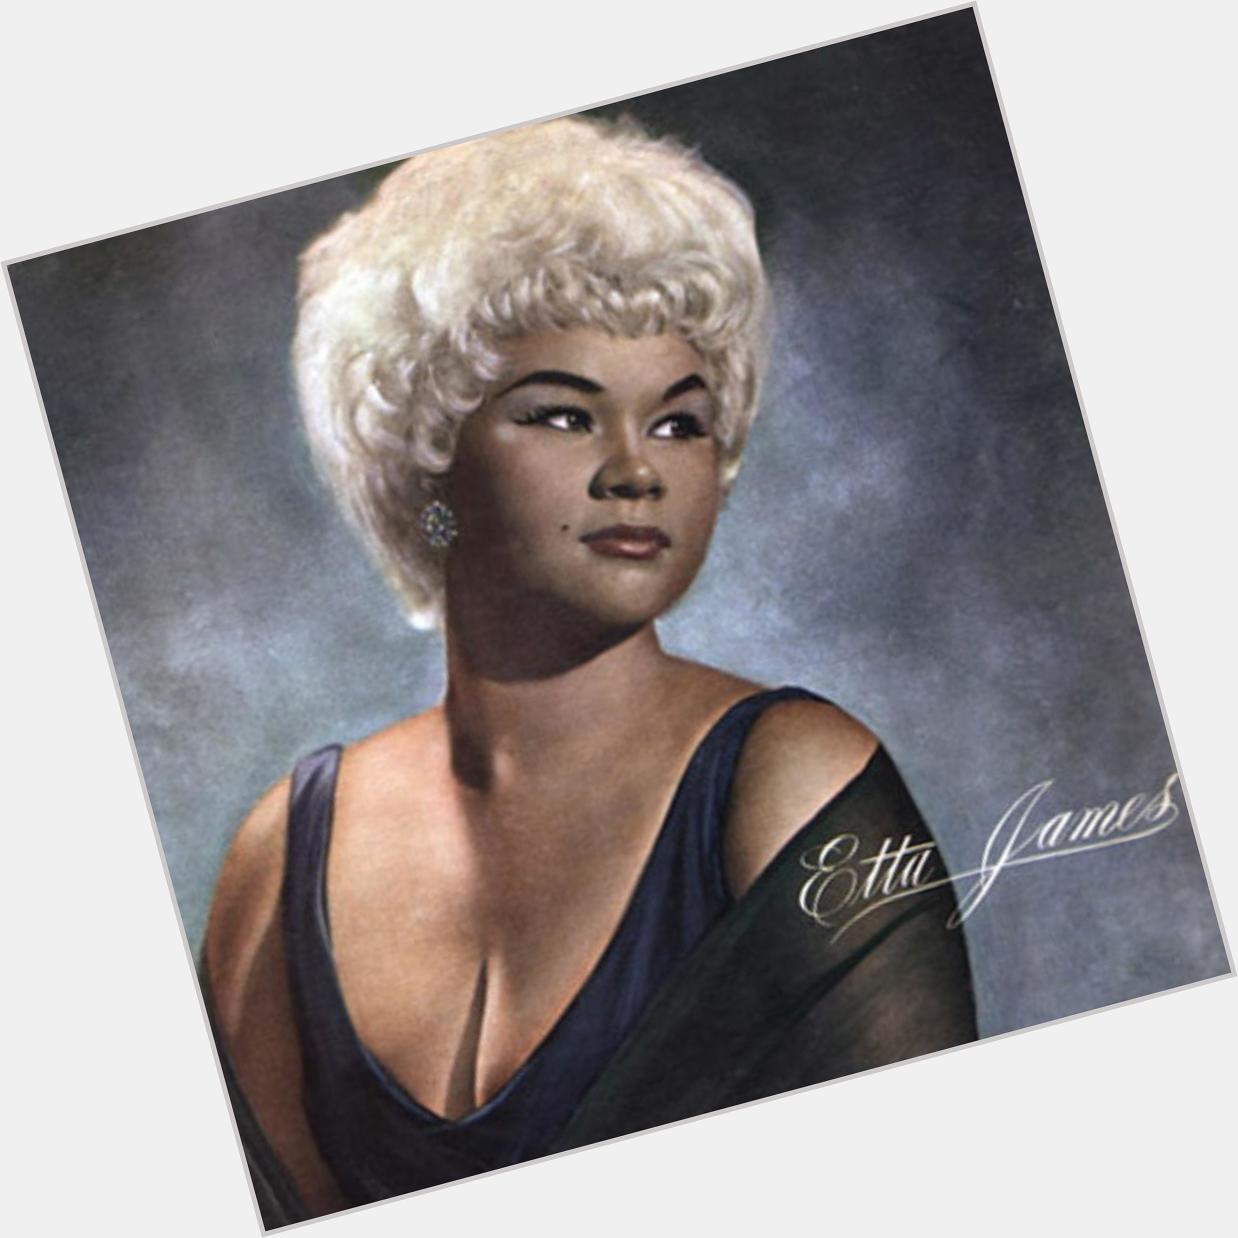 Happy Birthday to Etta James, who would have turned 77 today! 